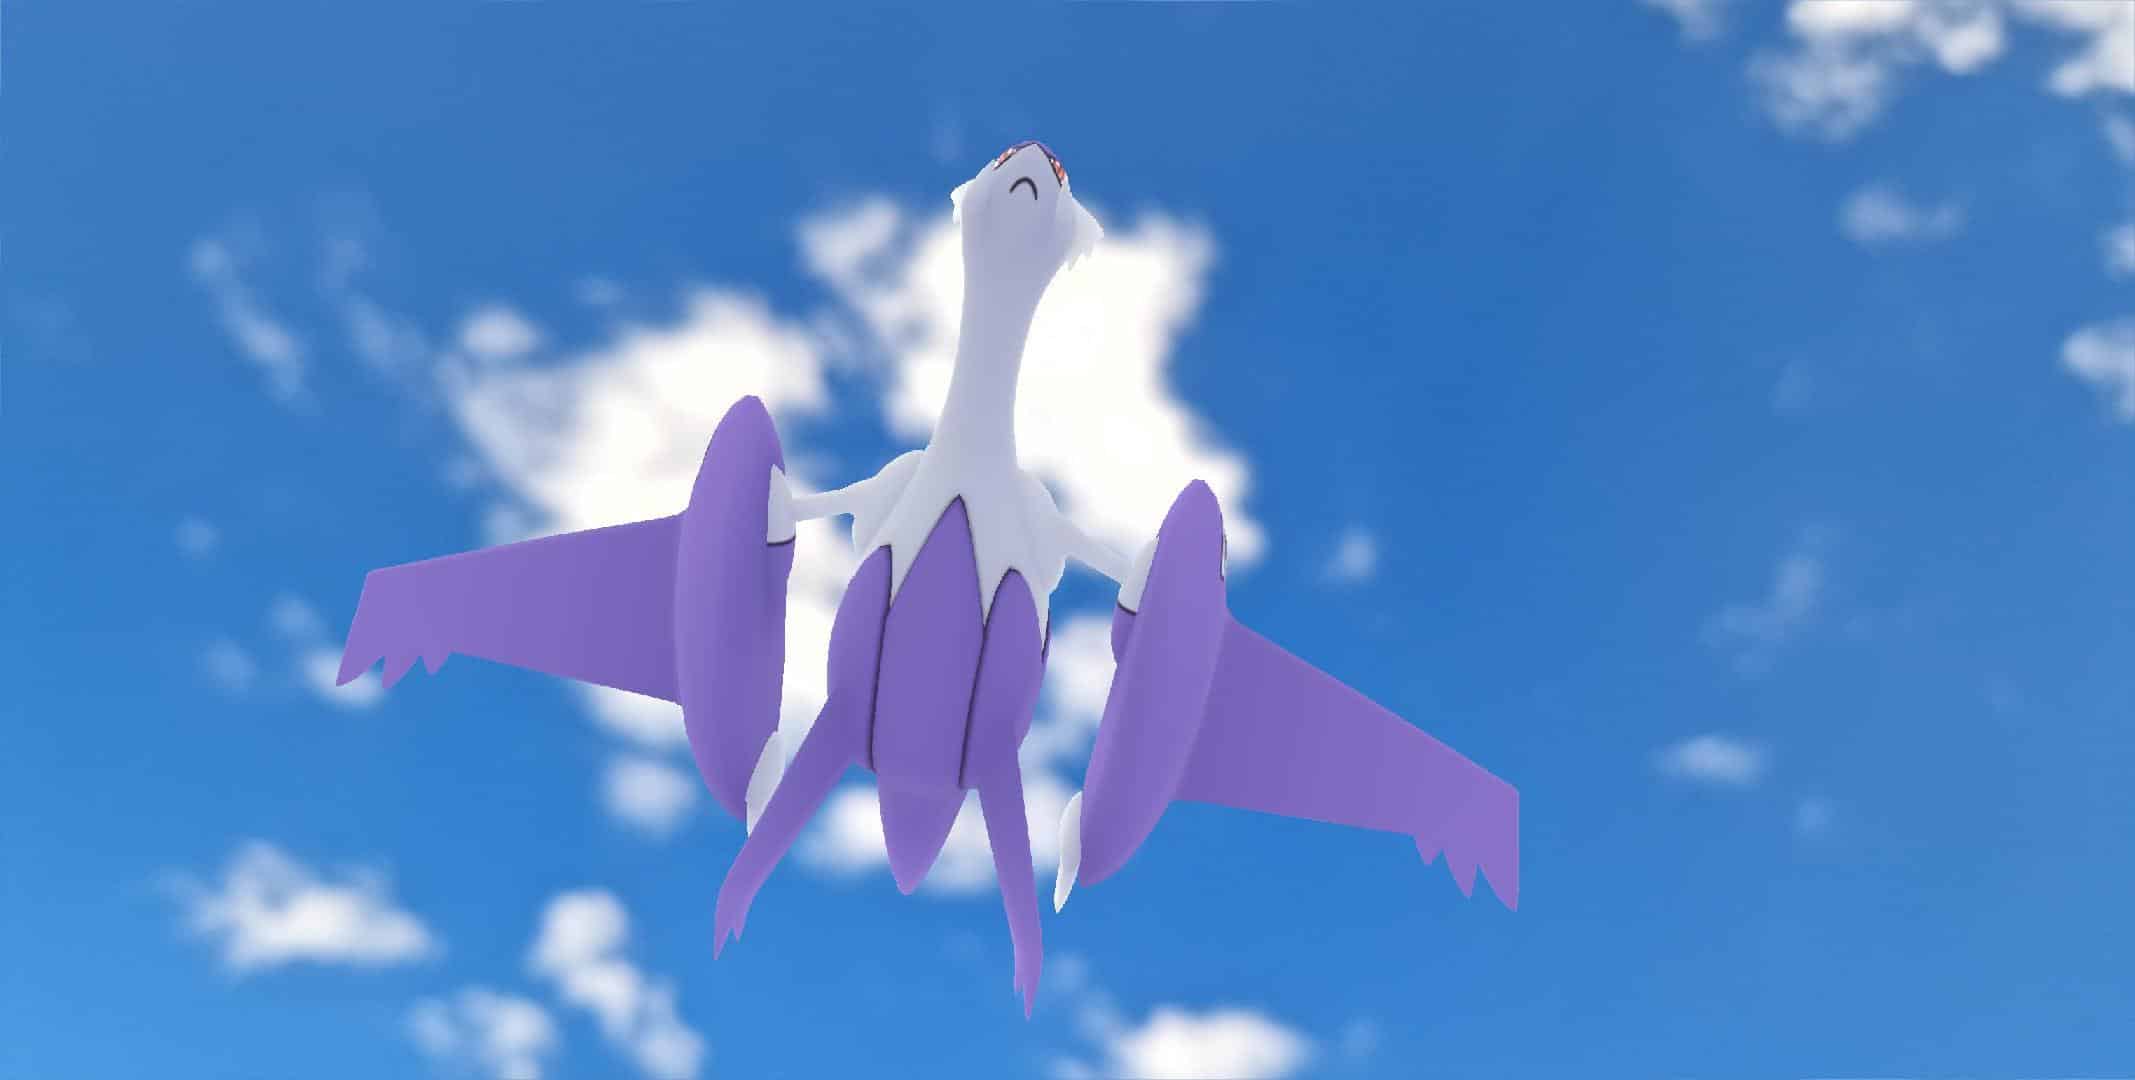 Close up of the Pokémon lugia focusing on the feet in a blue sky background